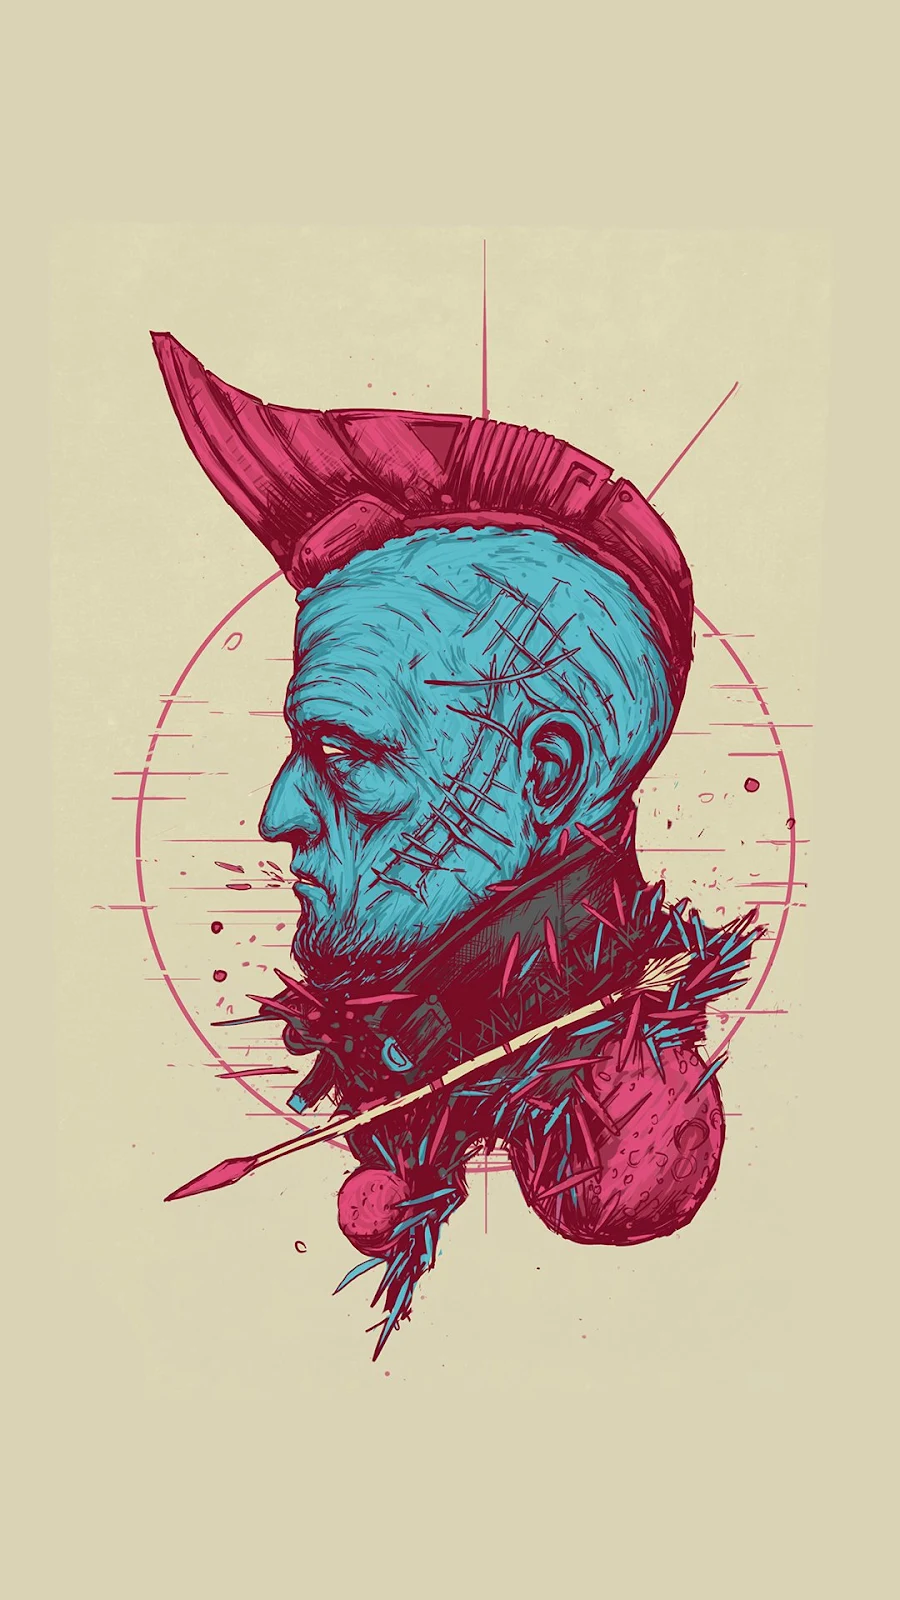 A Cool Illustration, Yondu, Peter Quill Star-Lord, Rocket Raccoon, Groot Full HD iPhone Wallpaper for Free Download in High Quality [1080x1920]